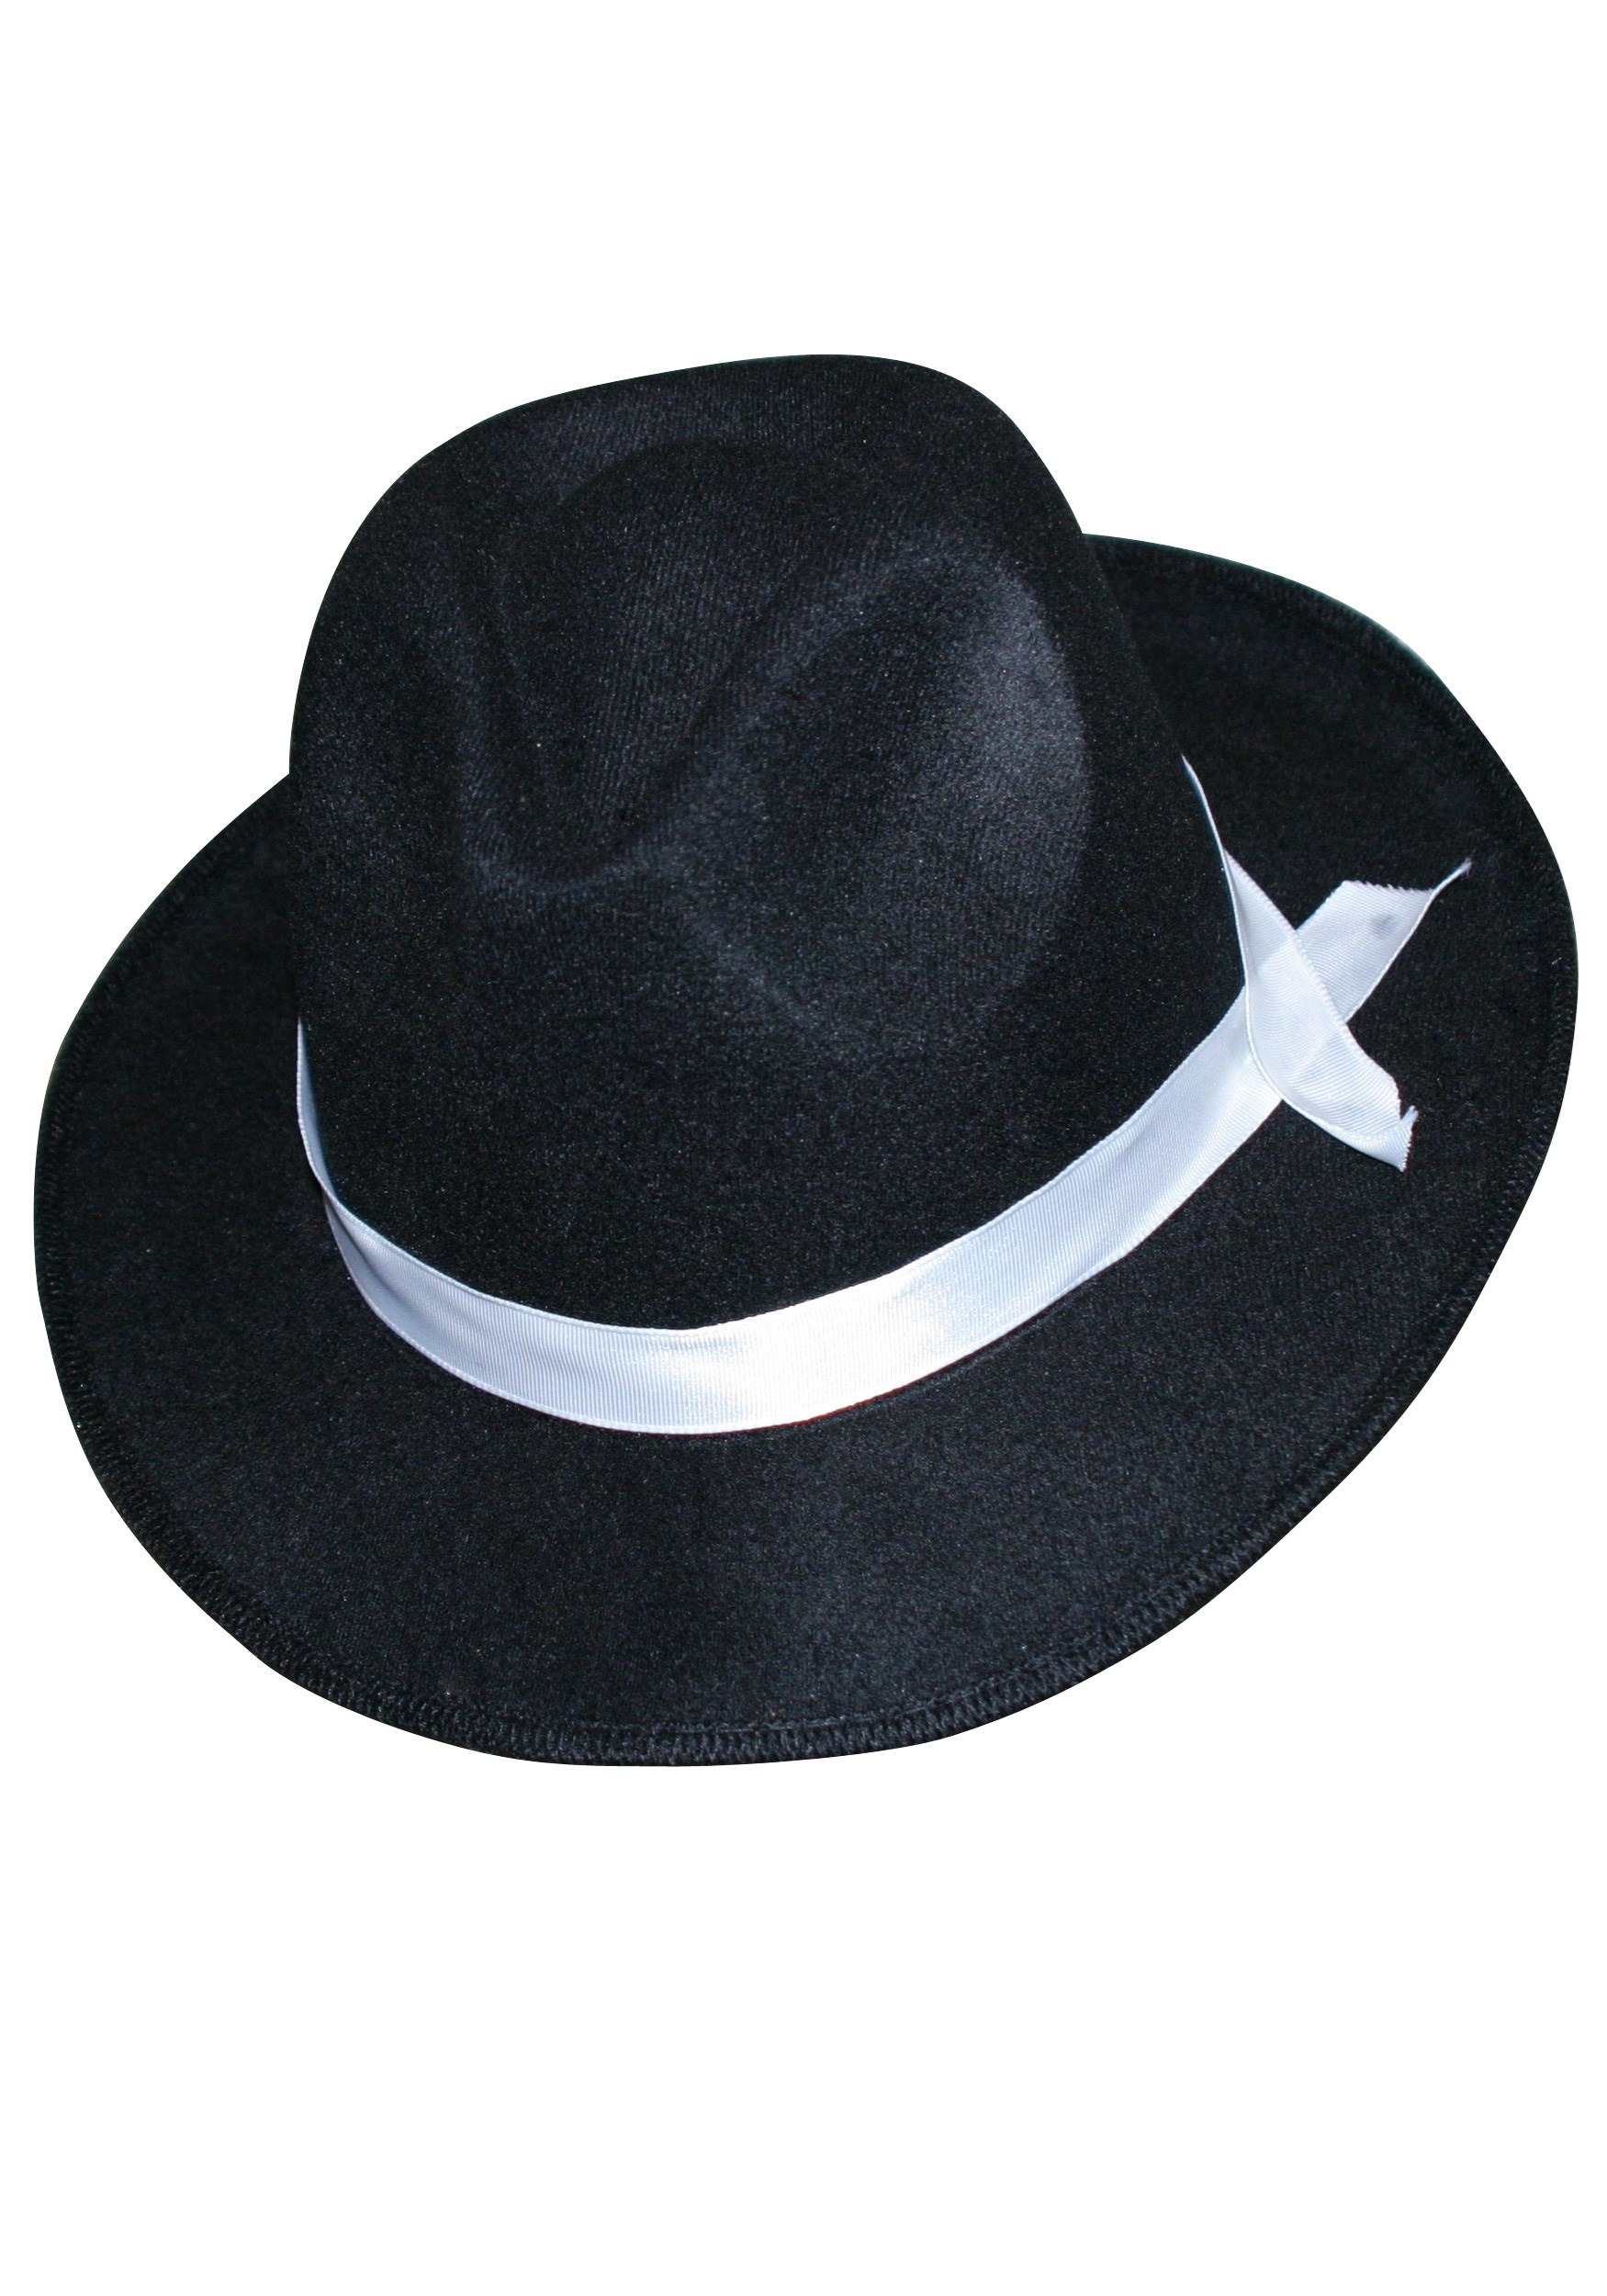 Zoot Suit Mobster Fancy Dress Costume Hat For Adults